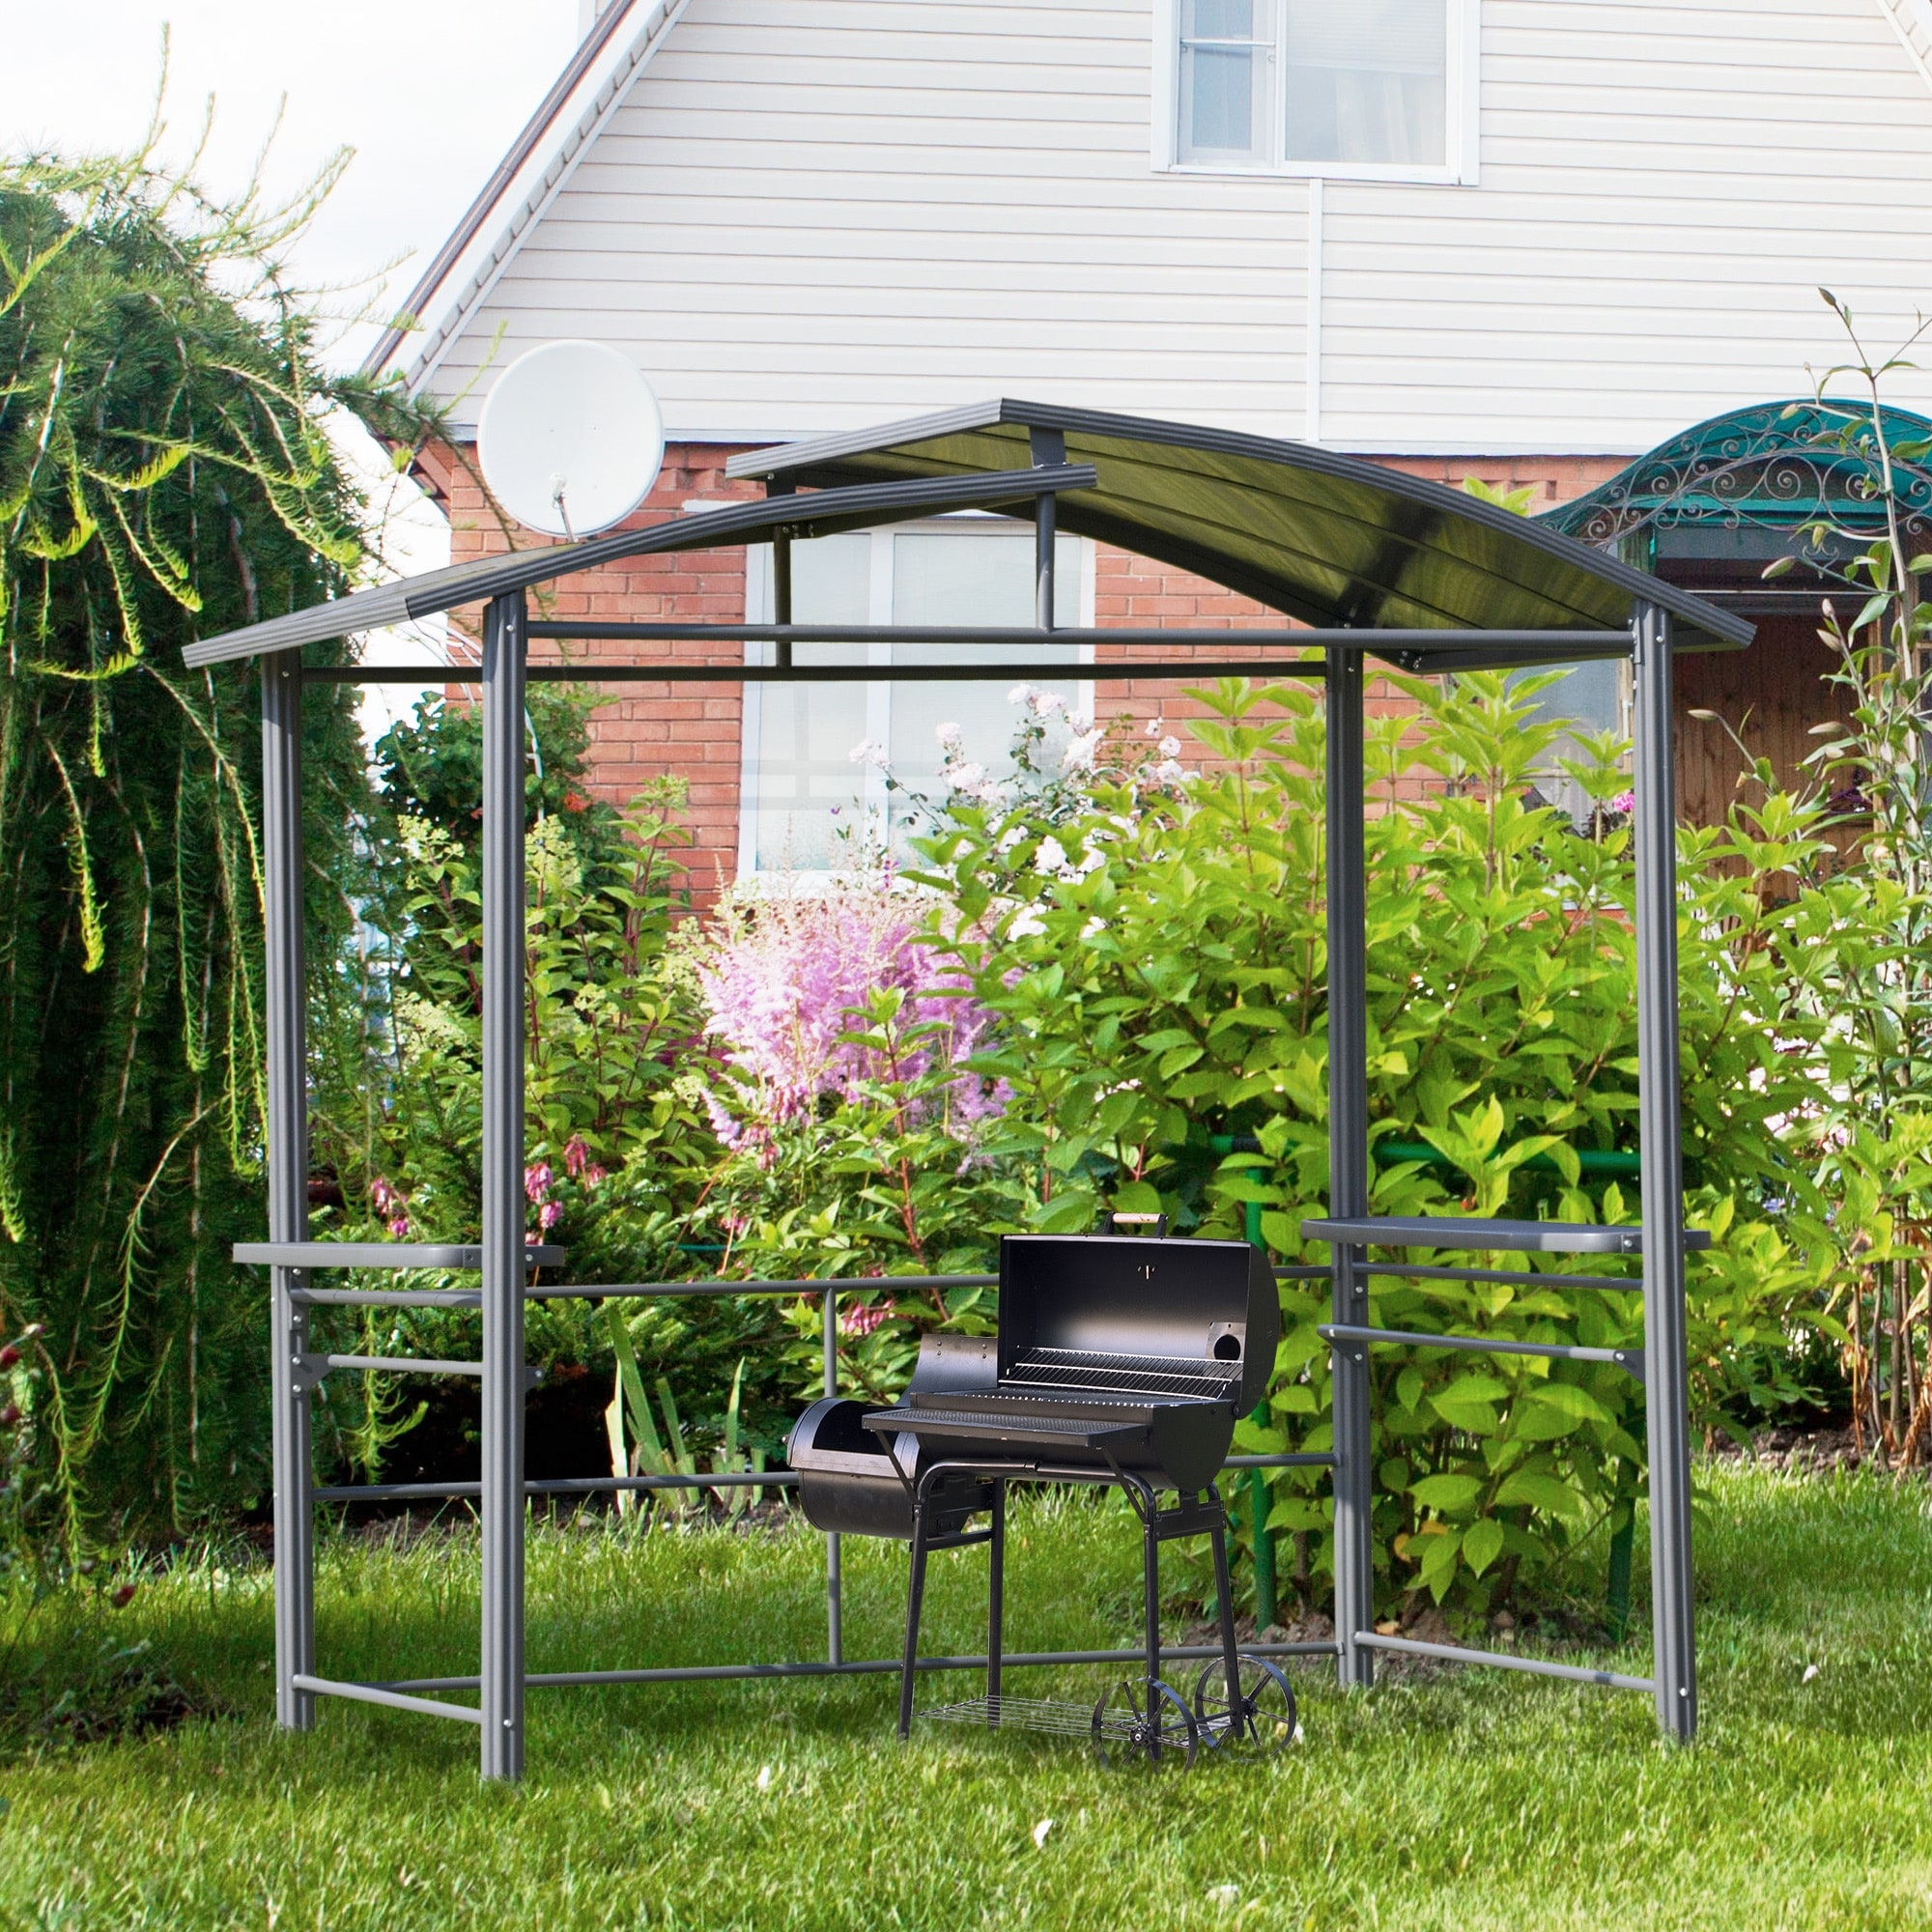 Grand Patio Grill Gazebo 8 x 5 FT,Patio Canopy Shelter for Outdoor BBQ,Water Resistance Gazebo Tent Champagne